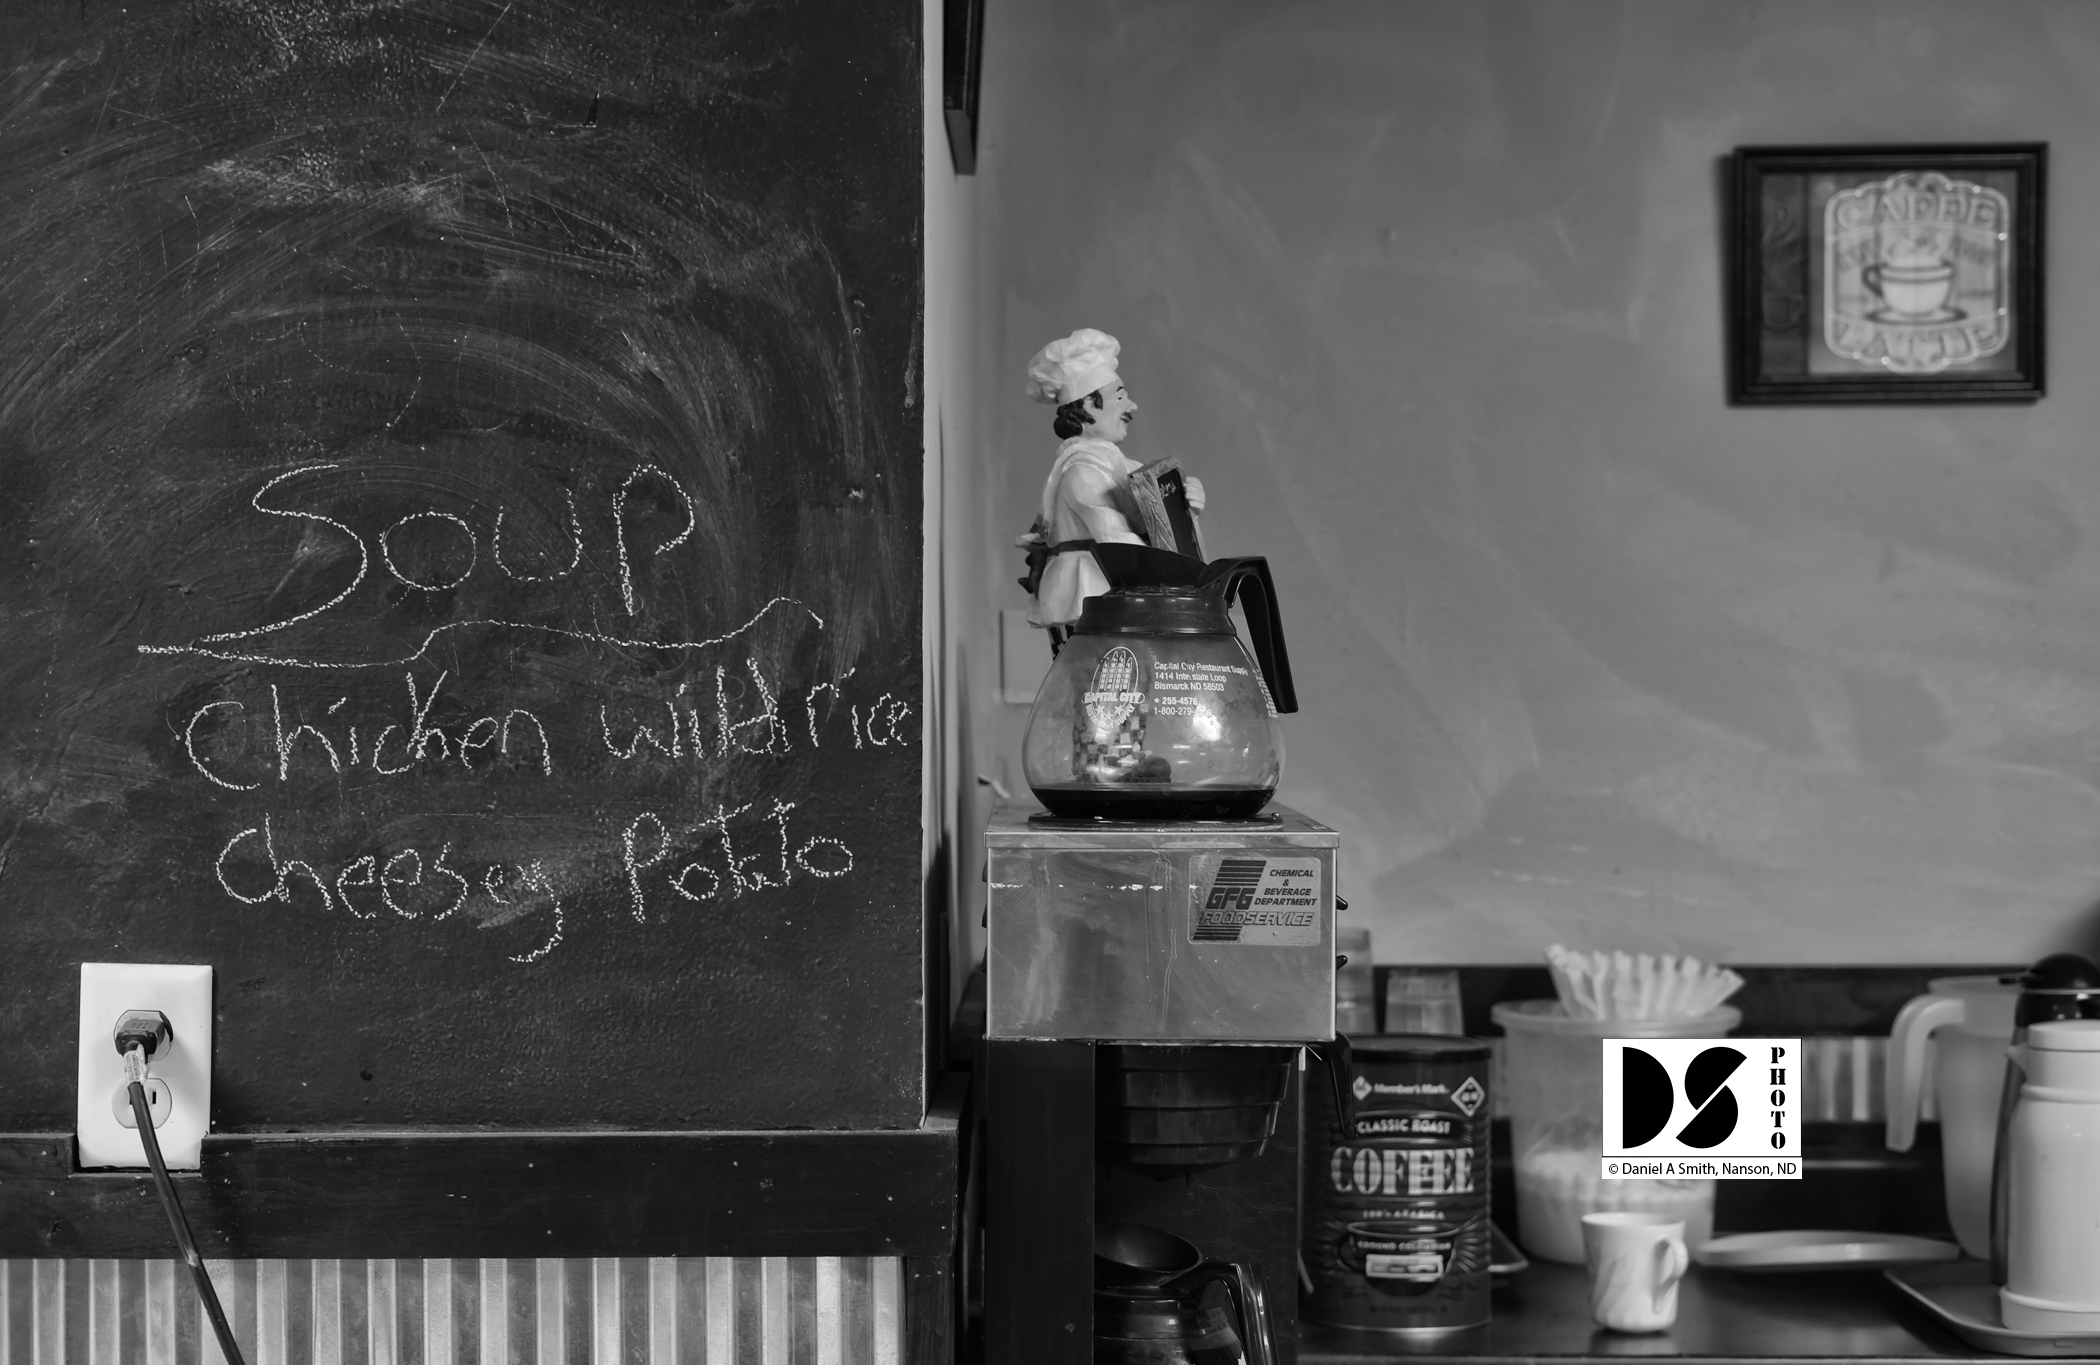 ©2021 Daniel A. Smith Chat & Chew Cafe, Wing, ND